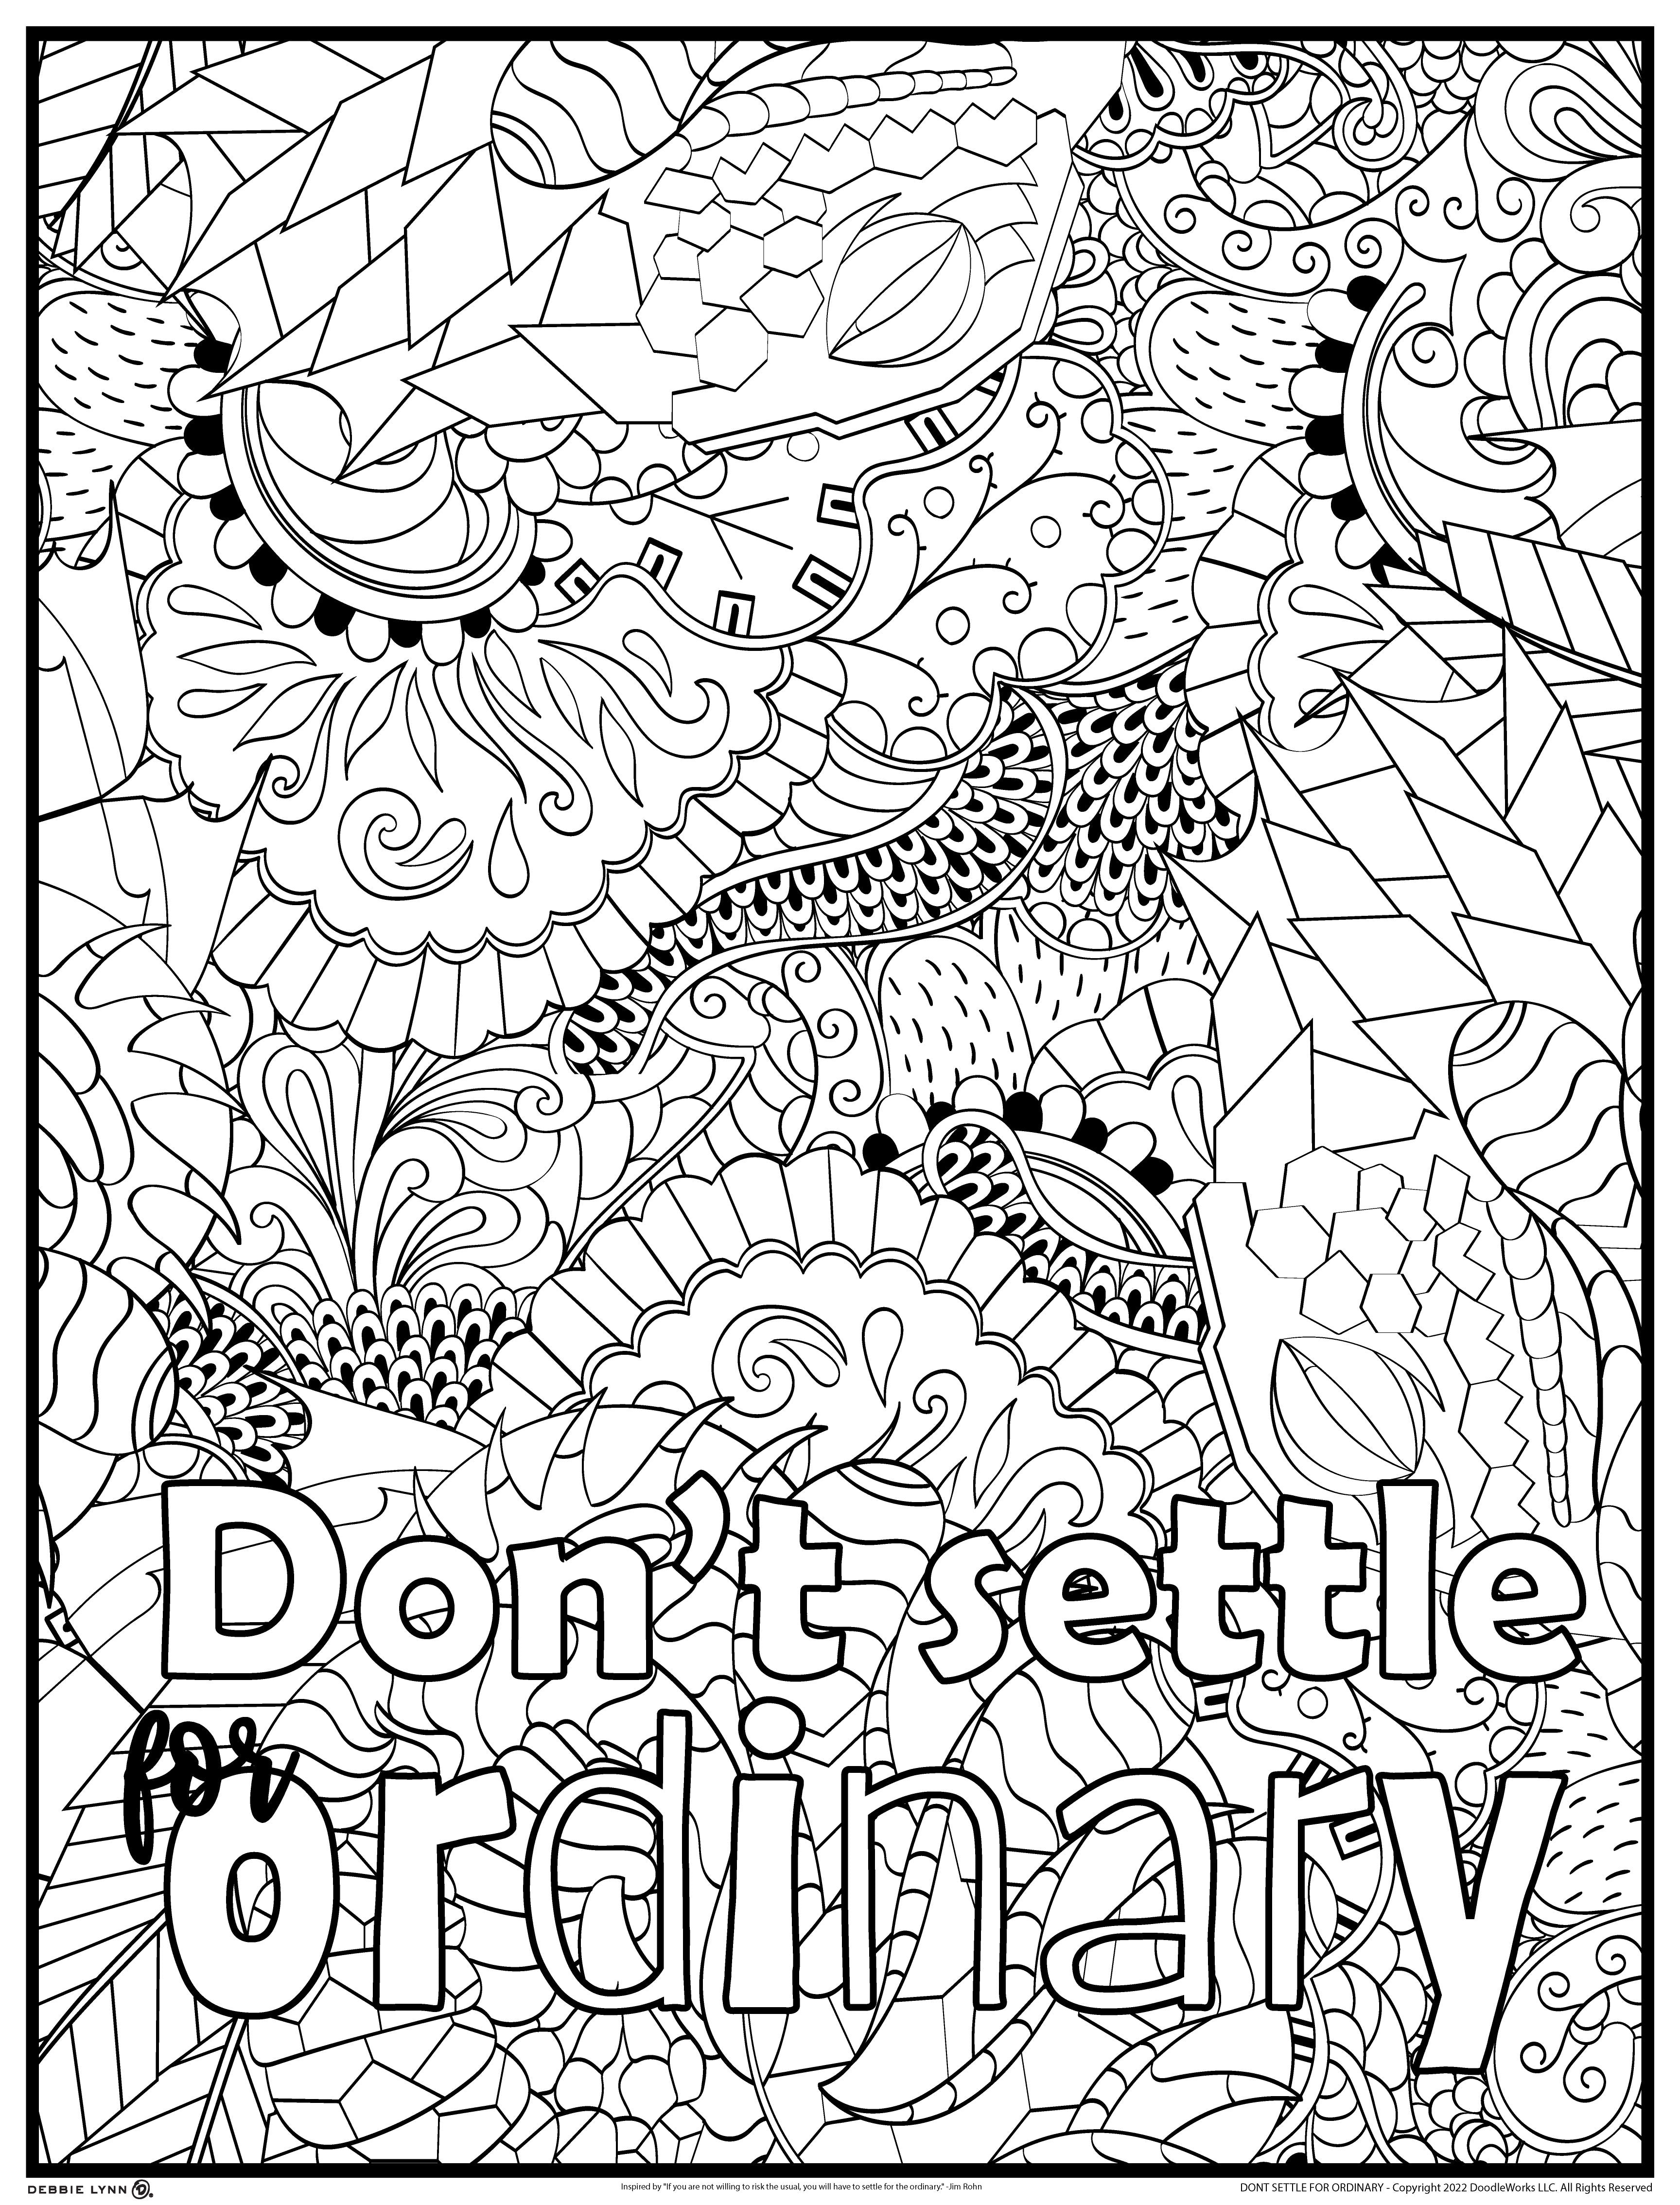 Don't Settle for Ordinary Personalized Giant Coloring Poster 48